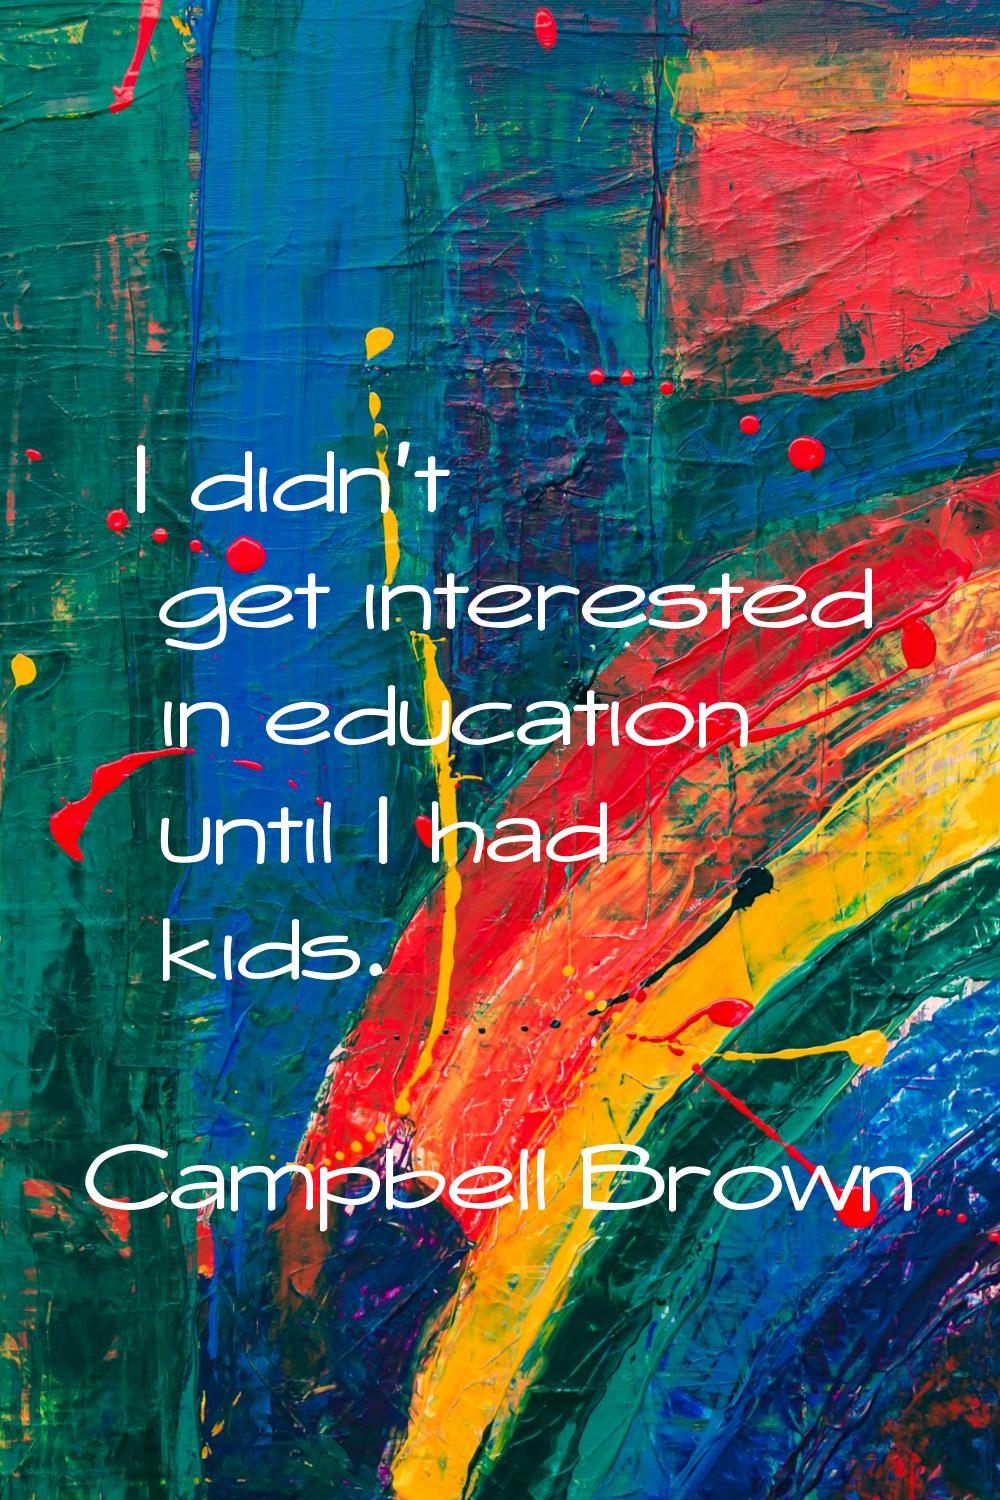 I didn't get interested in education until I had kids.